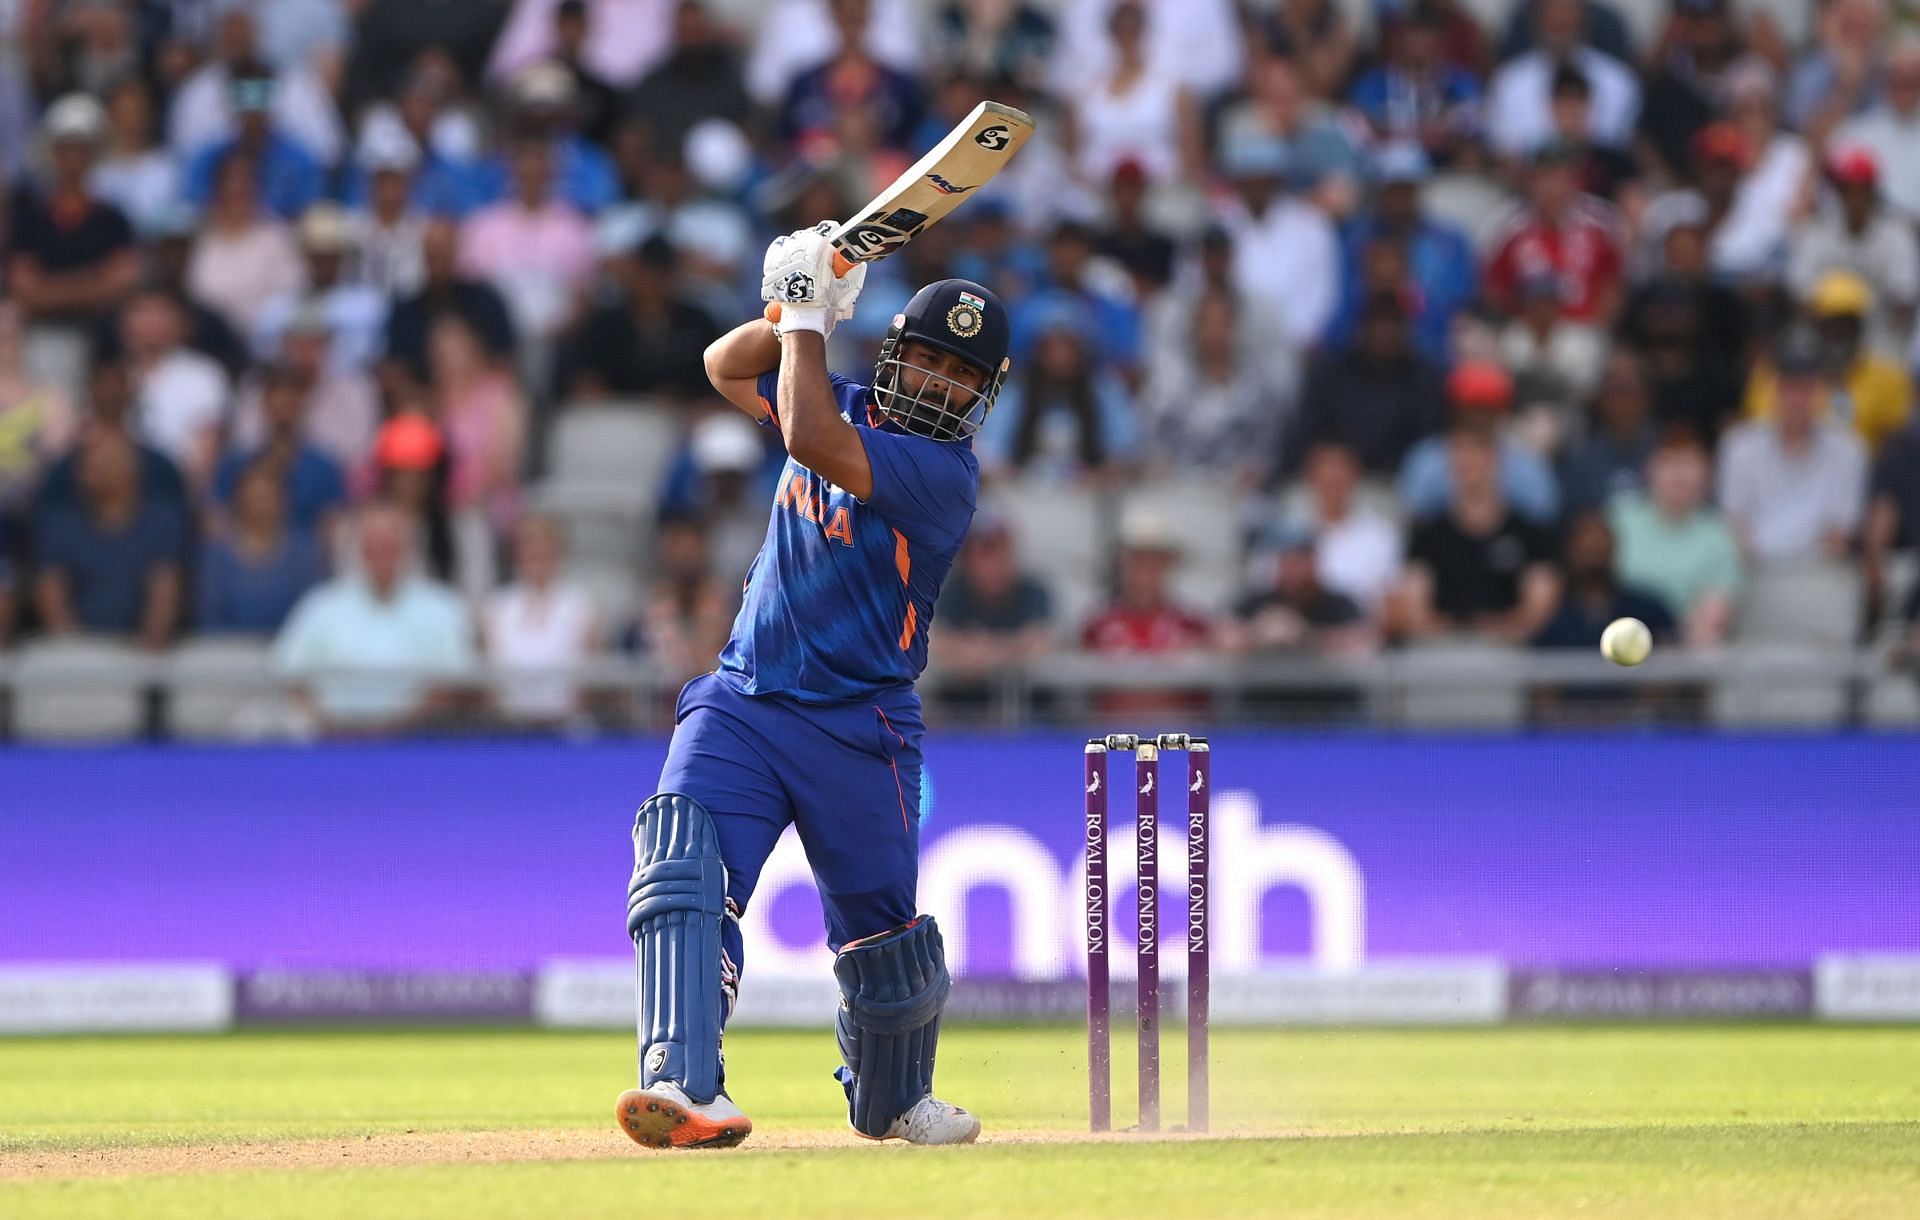 Rishabh Pant has played some terrific knocks in international cricket. Pic: Getty Images